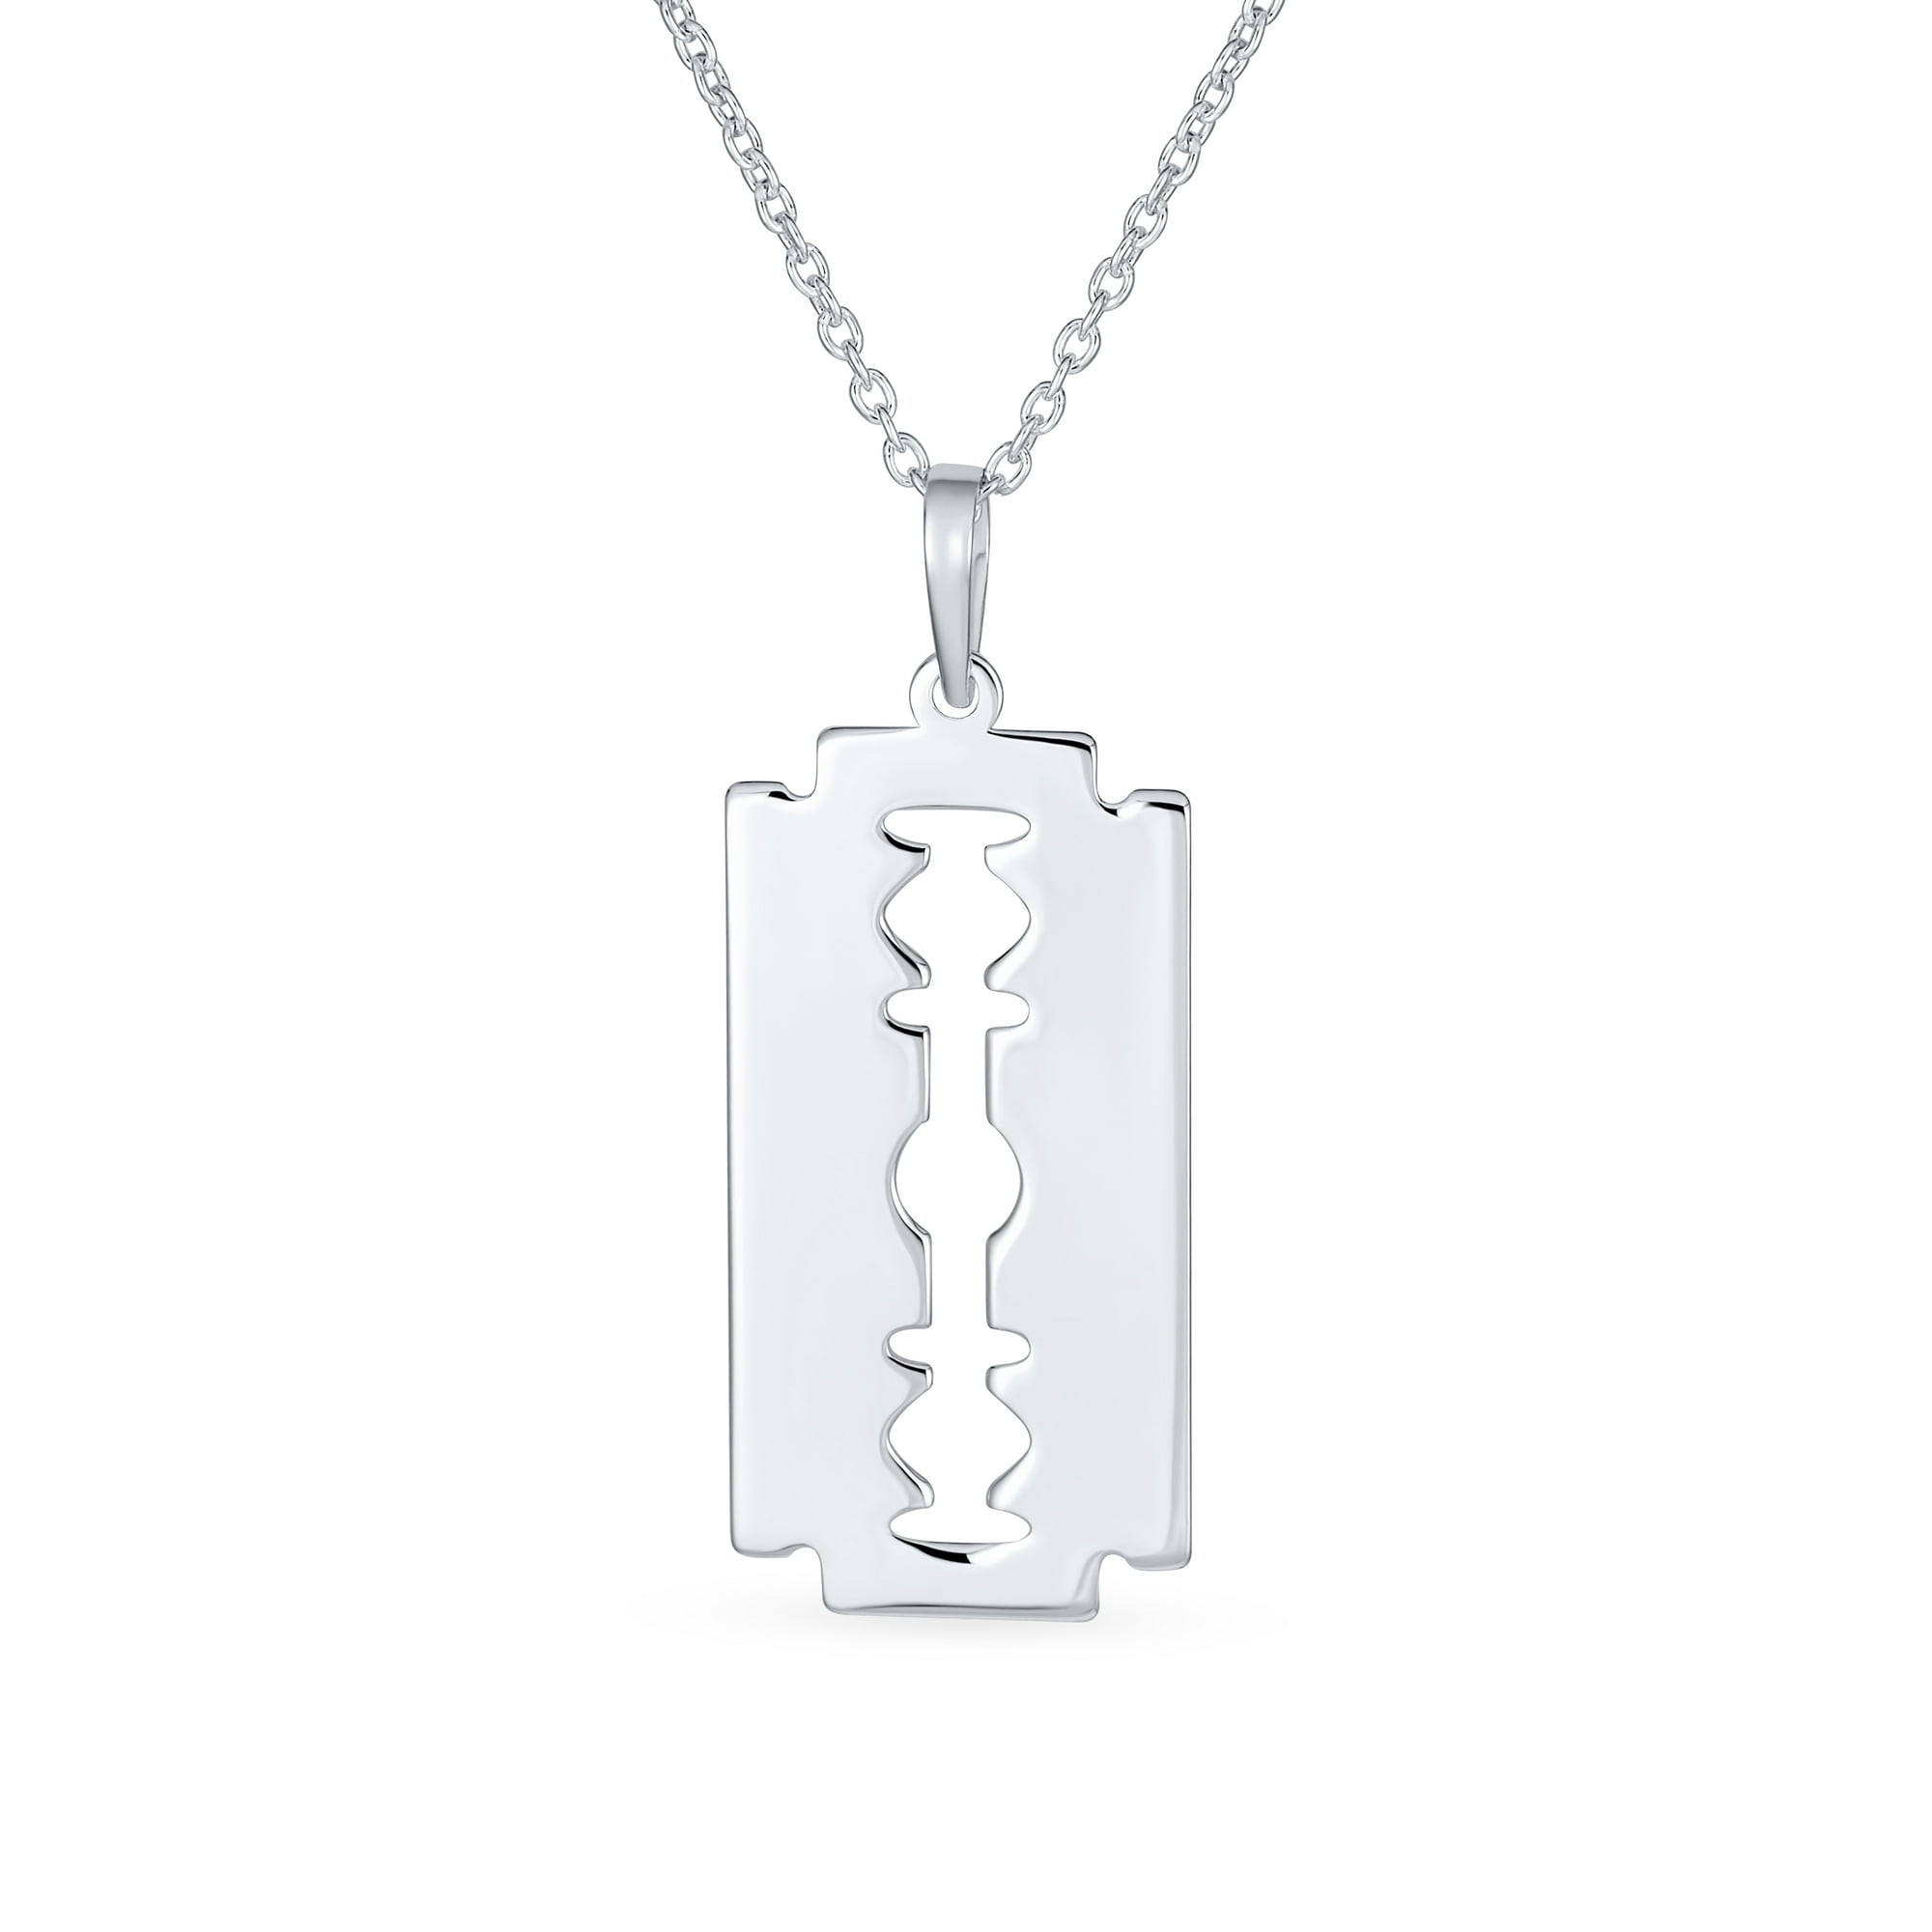 Personalize Unisex Hip Hop Biker Jewelry Goth Rock Razor Blade Dog Tag Pendant  Necklace for Men Women Teens .925 Sterling Silver with Chain Customizable